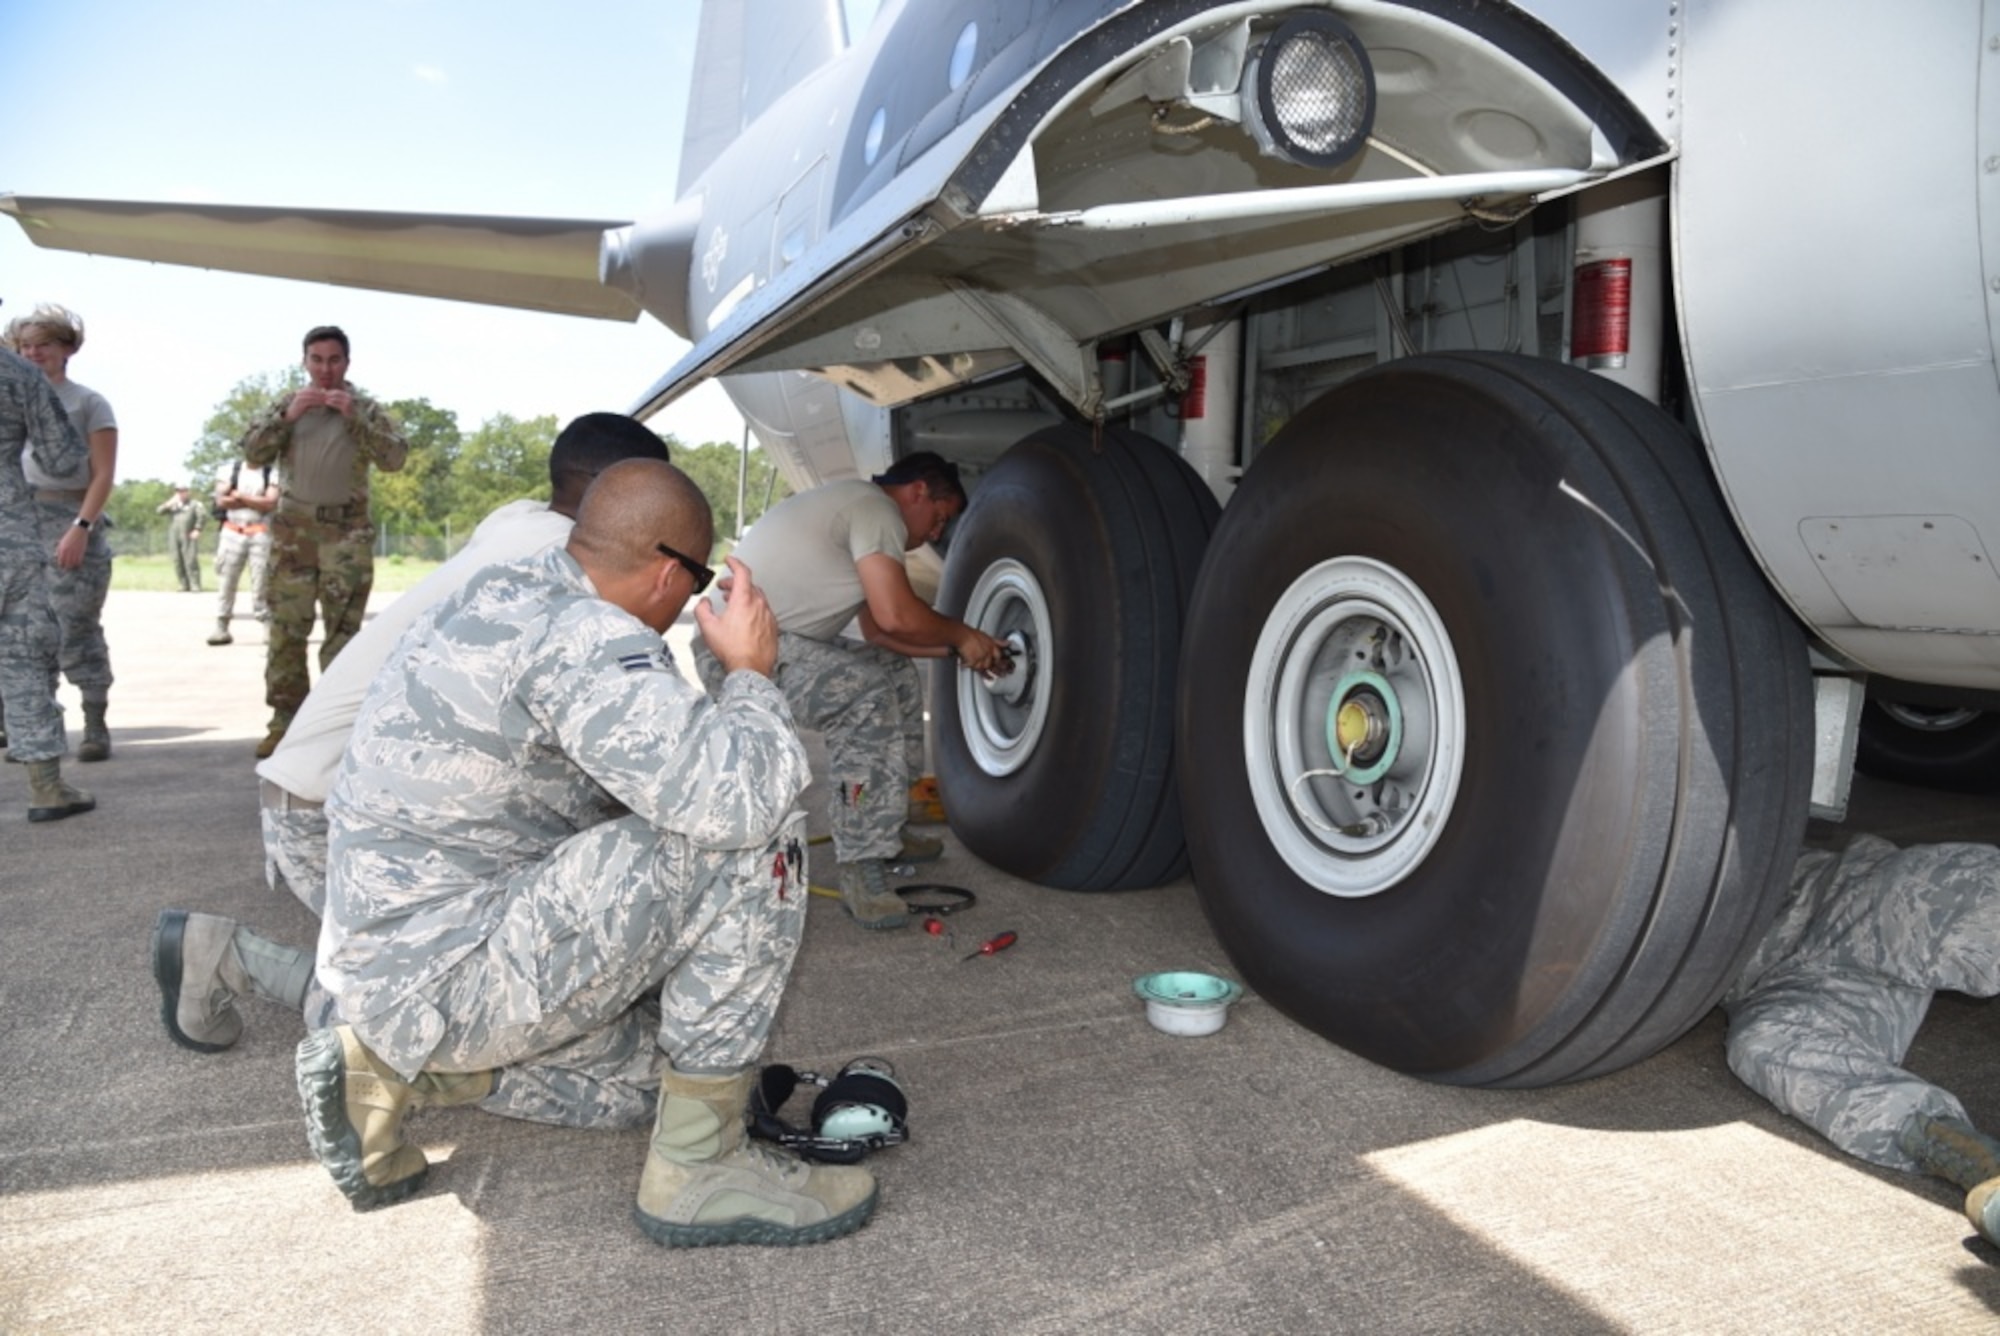 A 920th HH-60G Pave Hawk helicopter crew refuels from a wing HC-130P/N King refueler in-between rescuing victims from the aftermath of Hurricane Harvey in Texas August 30, 2017. Approximately 94 Citizen Airmen have joined forces with their northern neighbors at Moody Air Force Base, Georgia, the 23rd Rescue Wing, and are operating out of College Station, Texas to rescue people affected by the aftermath of Hurricane Harvey in support of Air Force’s Northern search and rescue mission for FEMA disaster relief efforts. (U.S. Air Force photo)